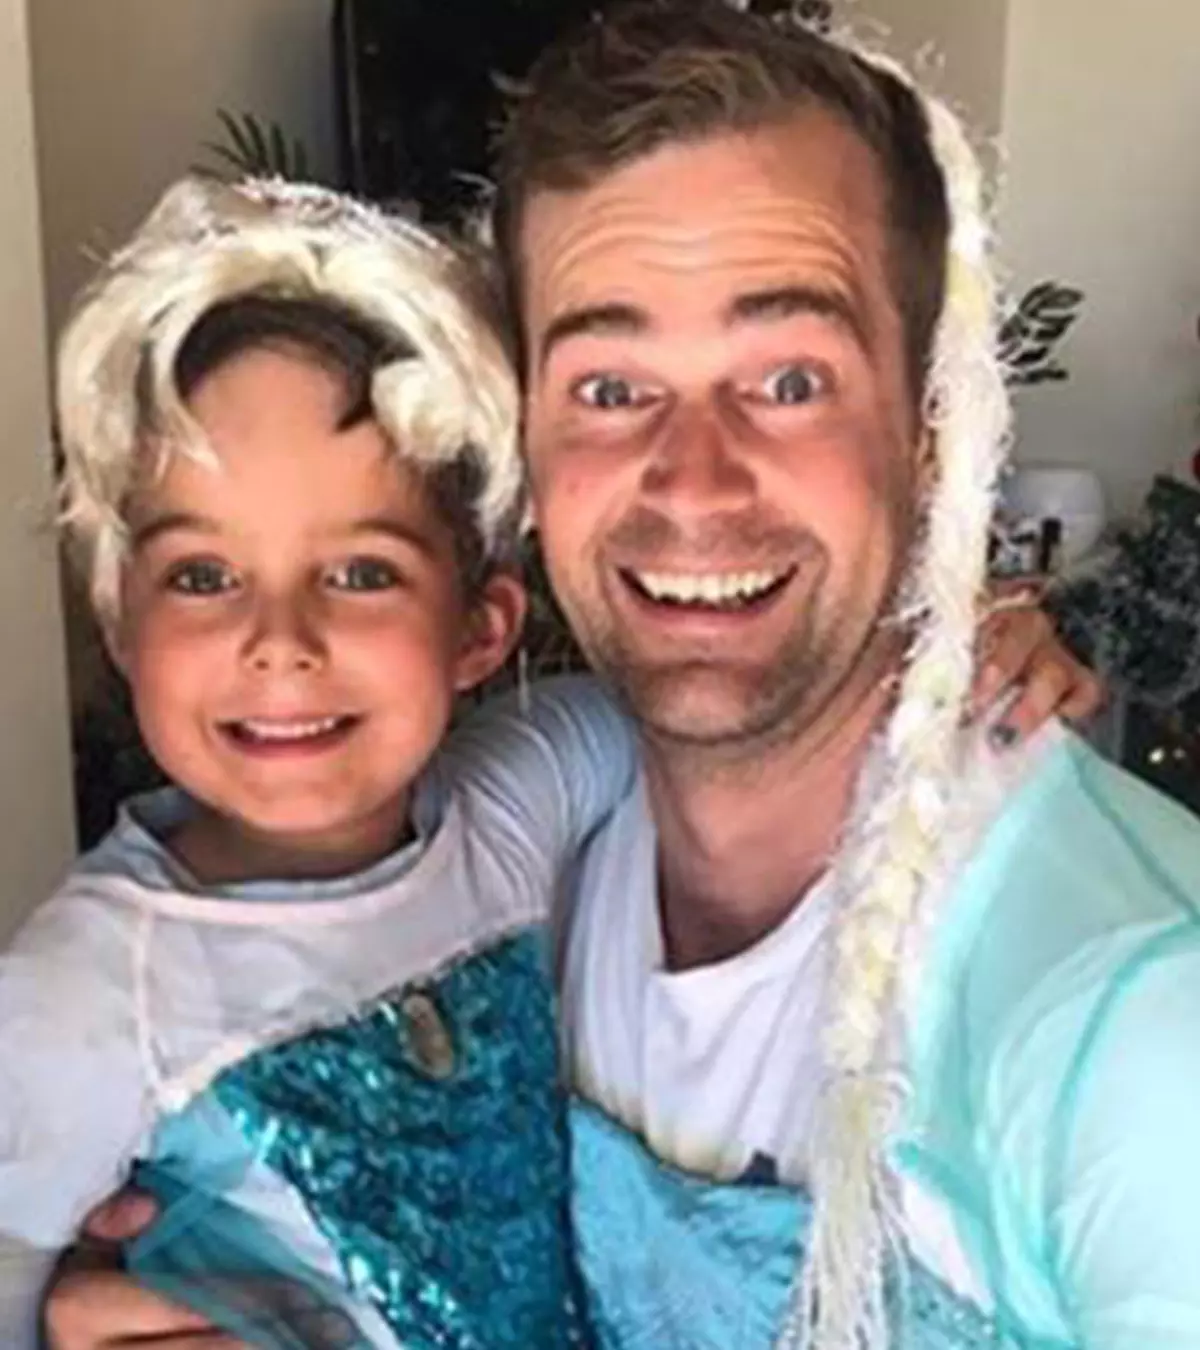 Scott Who Dressed Up As Frozen's Elsa Plans To Make A Movie On Gender-Neutral Parenting